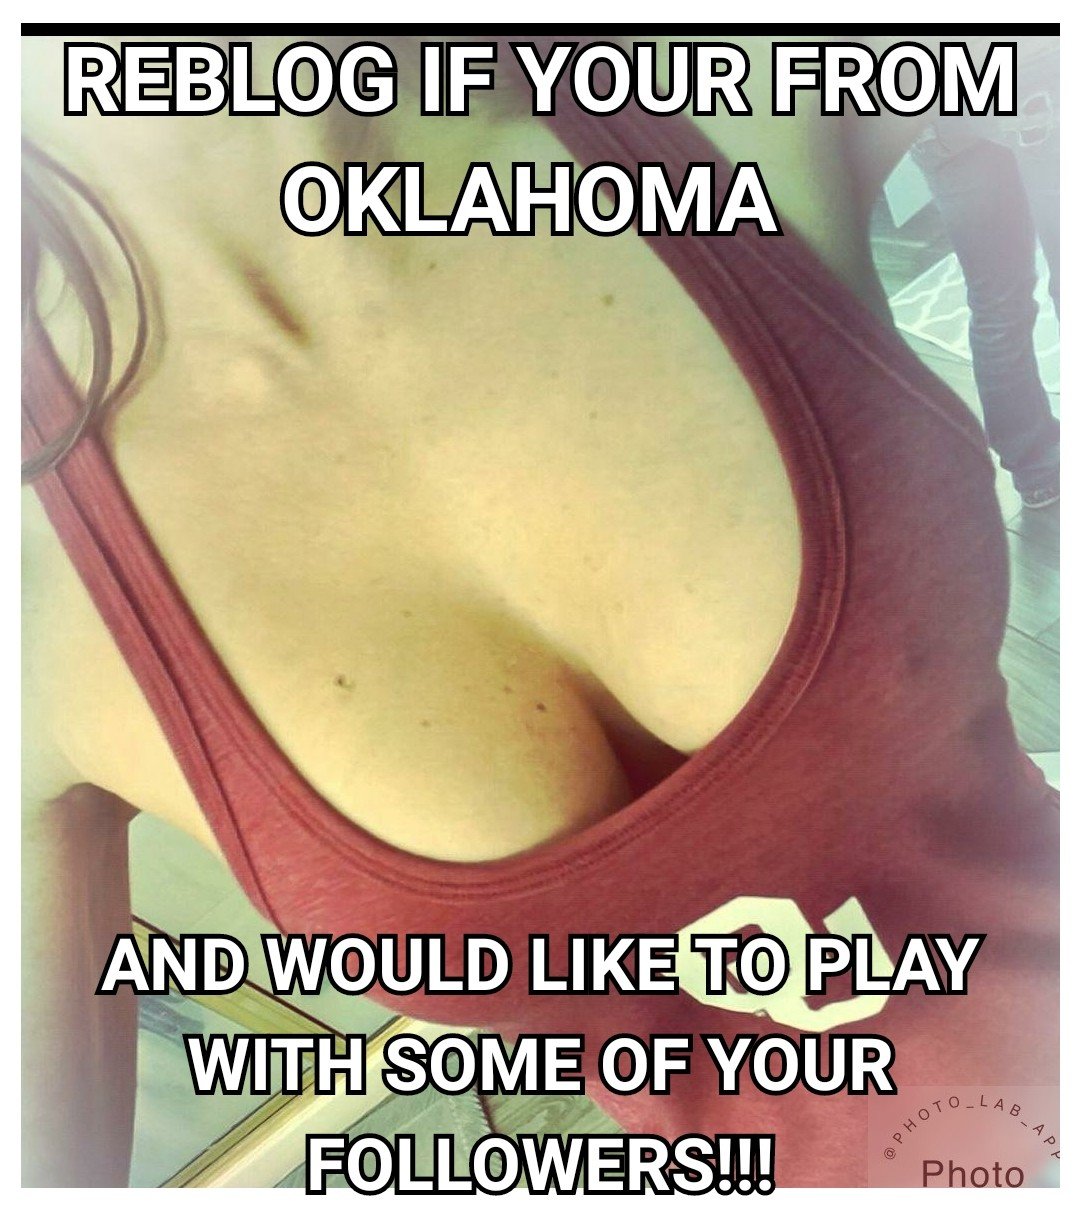 Watch the Photo by want2plzu22014 with the username @want2plzu22014, posted on September 2, 2018 and the text says 'docflgd:

mudman57:

shelbosblog:

ourlittlesidesecret:

Sooners, Cowboys! It’s almost football season!! Let’s have some fun!!

Representing Atoka! (If anybody gives a shit) lol

McAlester 

se oklahoma.  valliant 

McAlester'